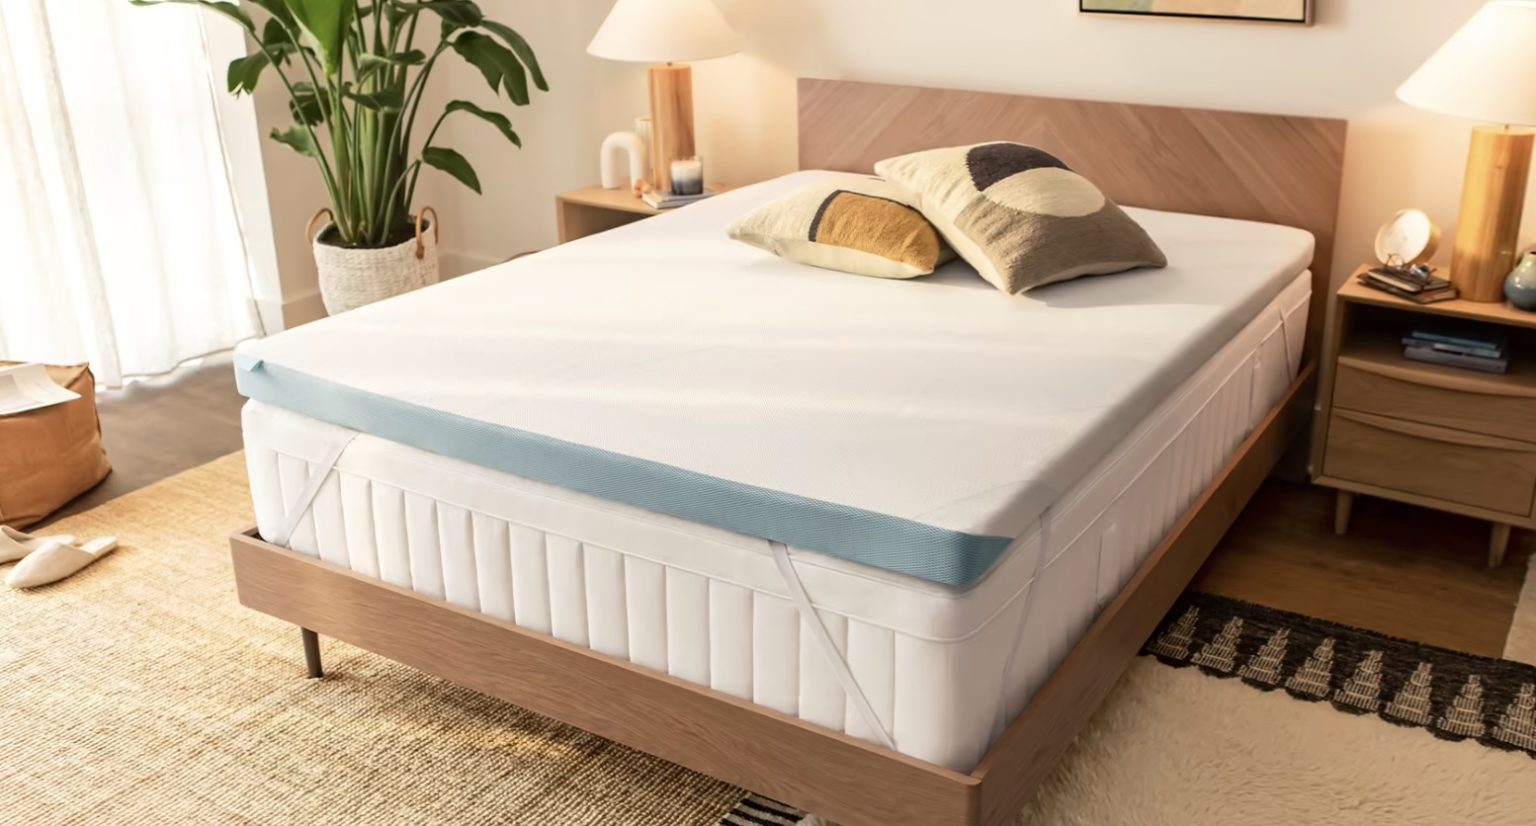 Product page photo of the Tempur-Pedic TEMPUR-Adapt + Cooling Topper